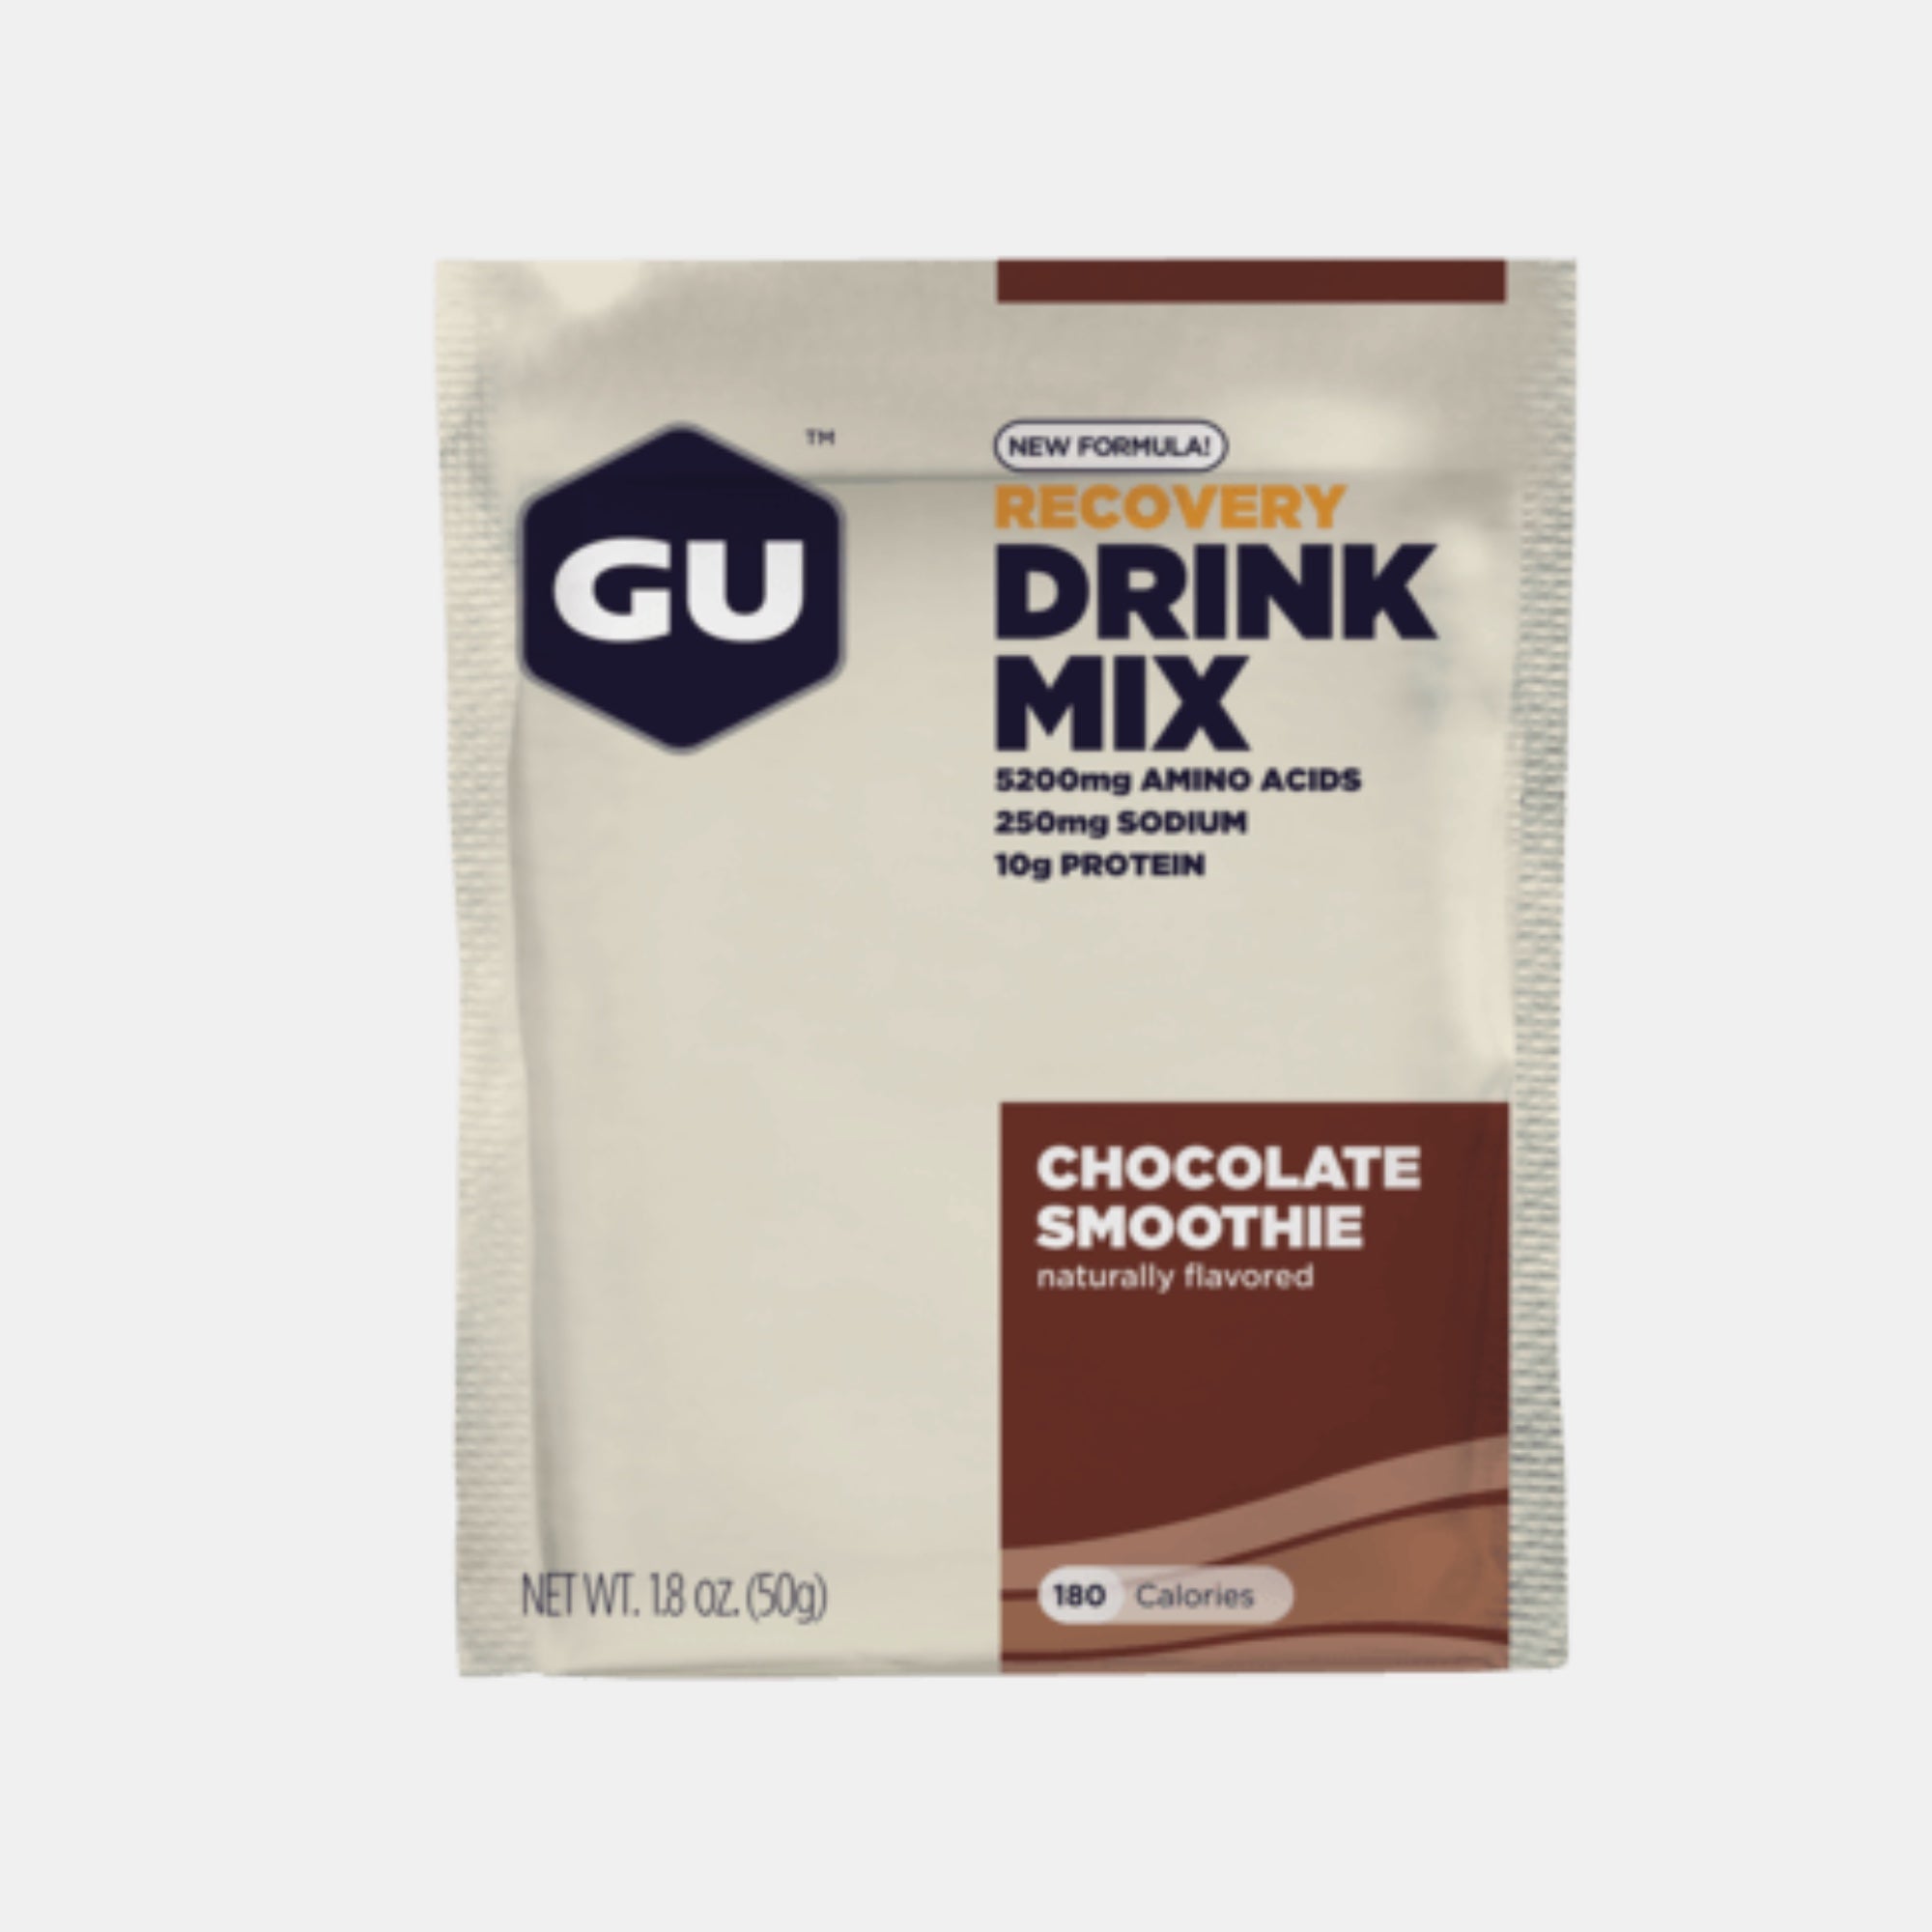 GU Recovery Drink Mix - Chocolate Smoothie